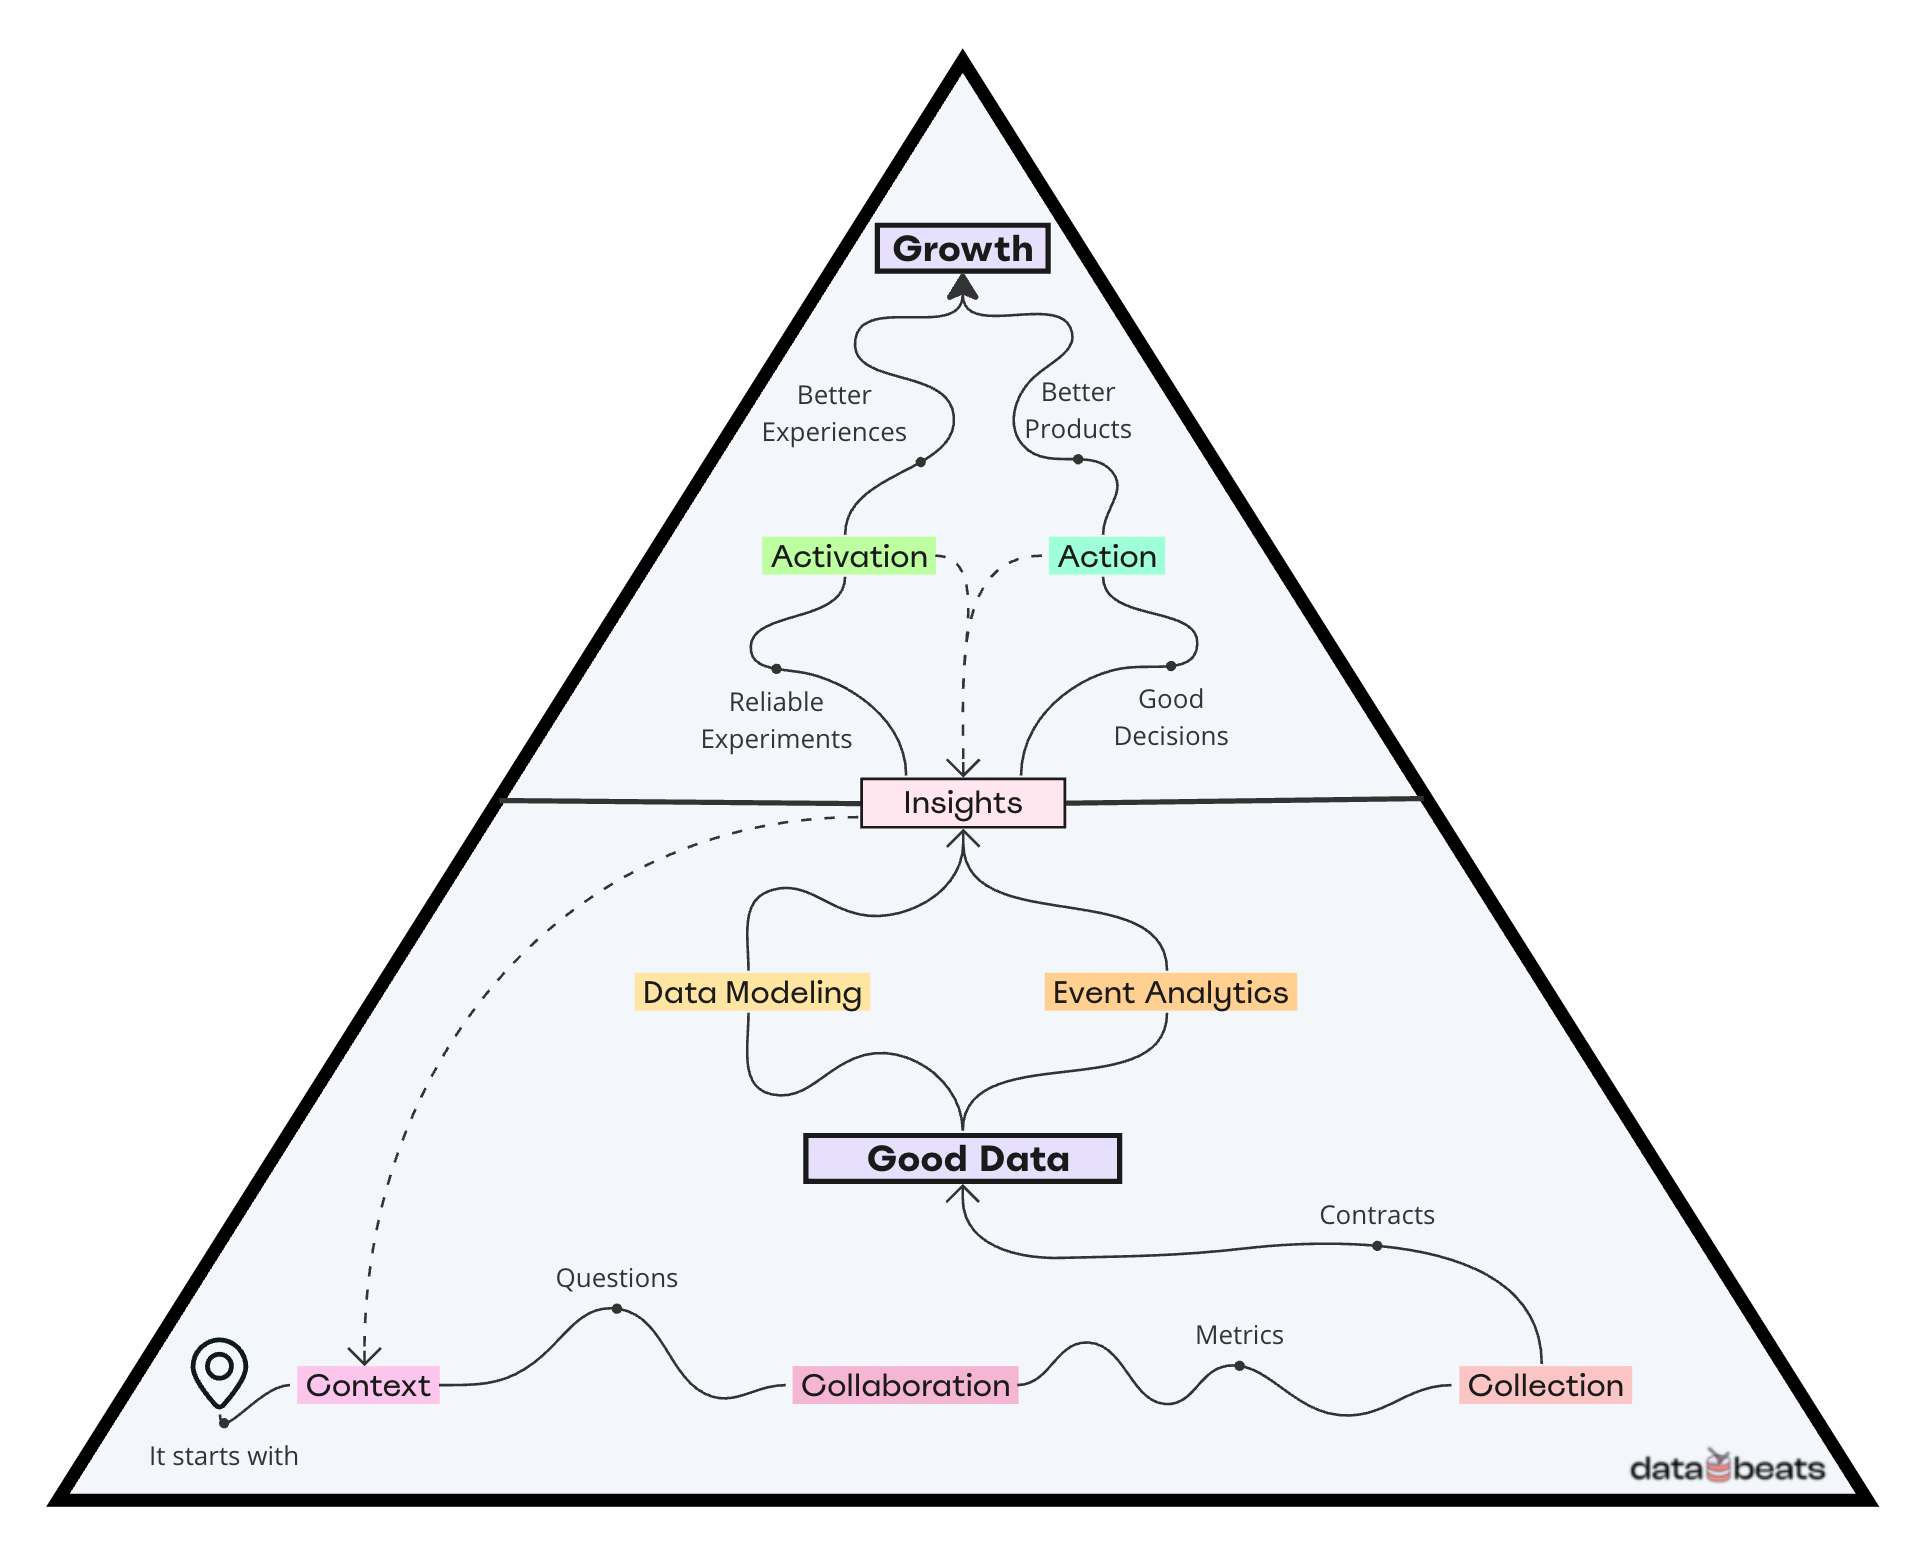 The GDG pyramid